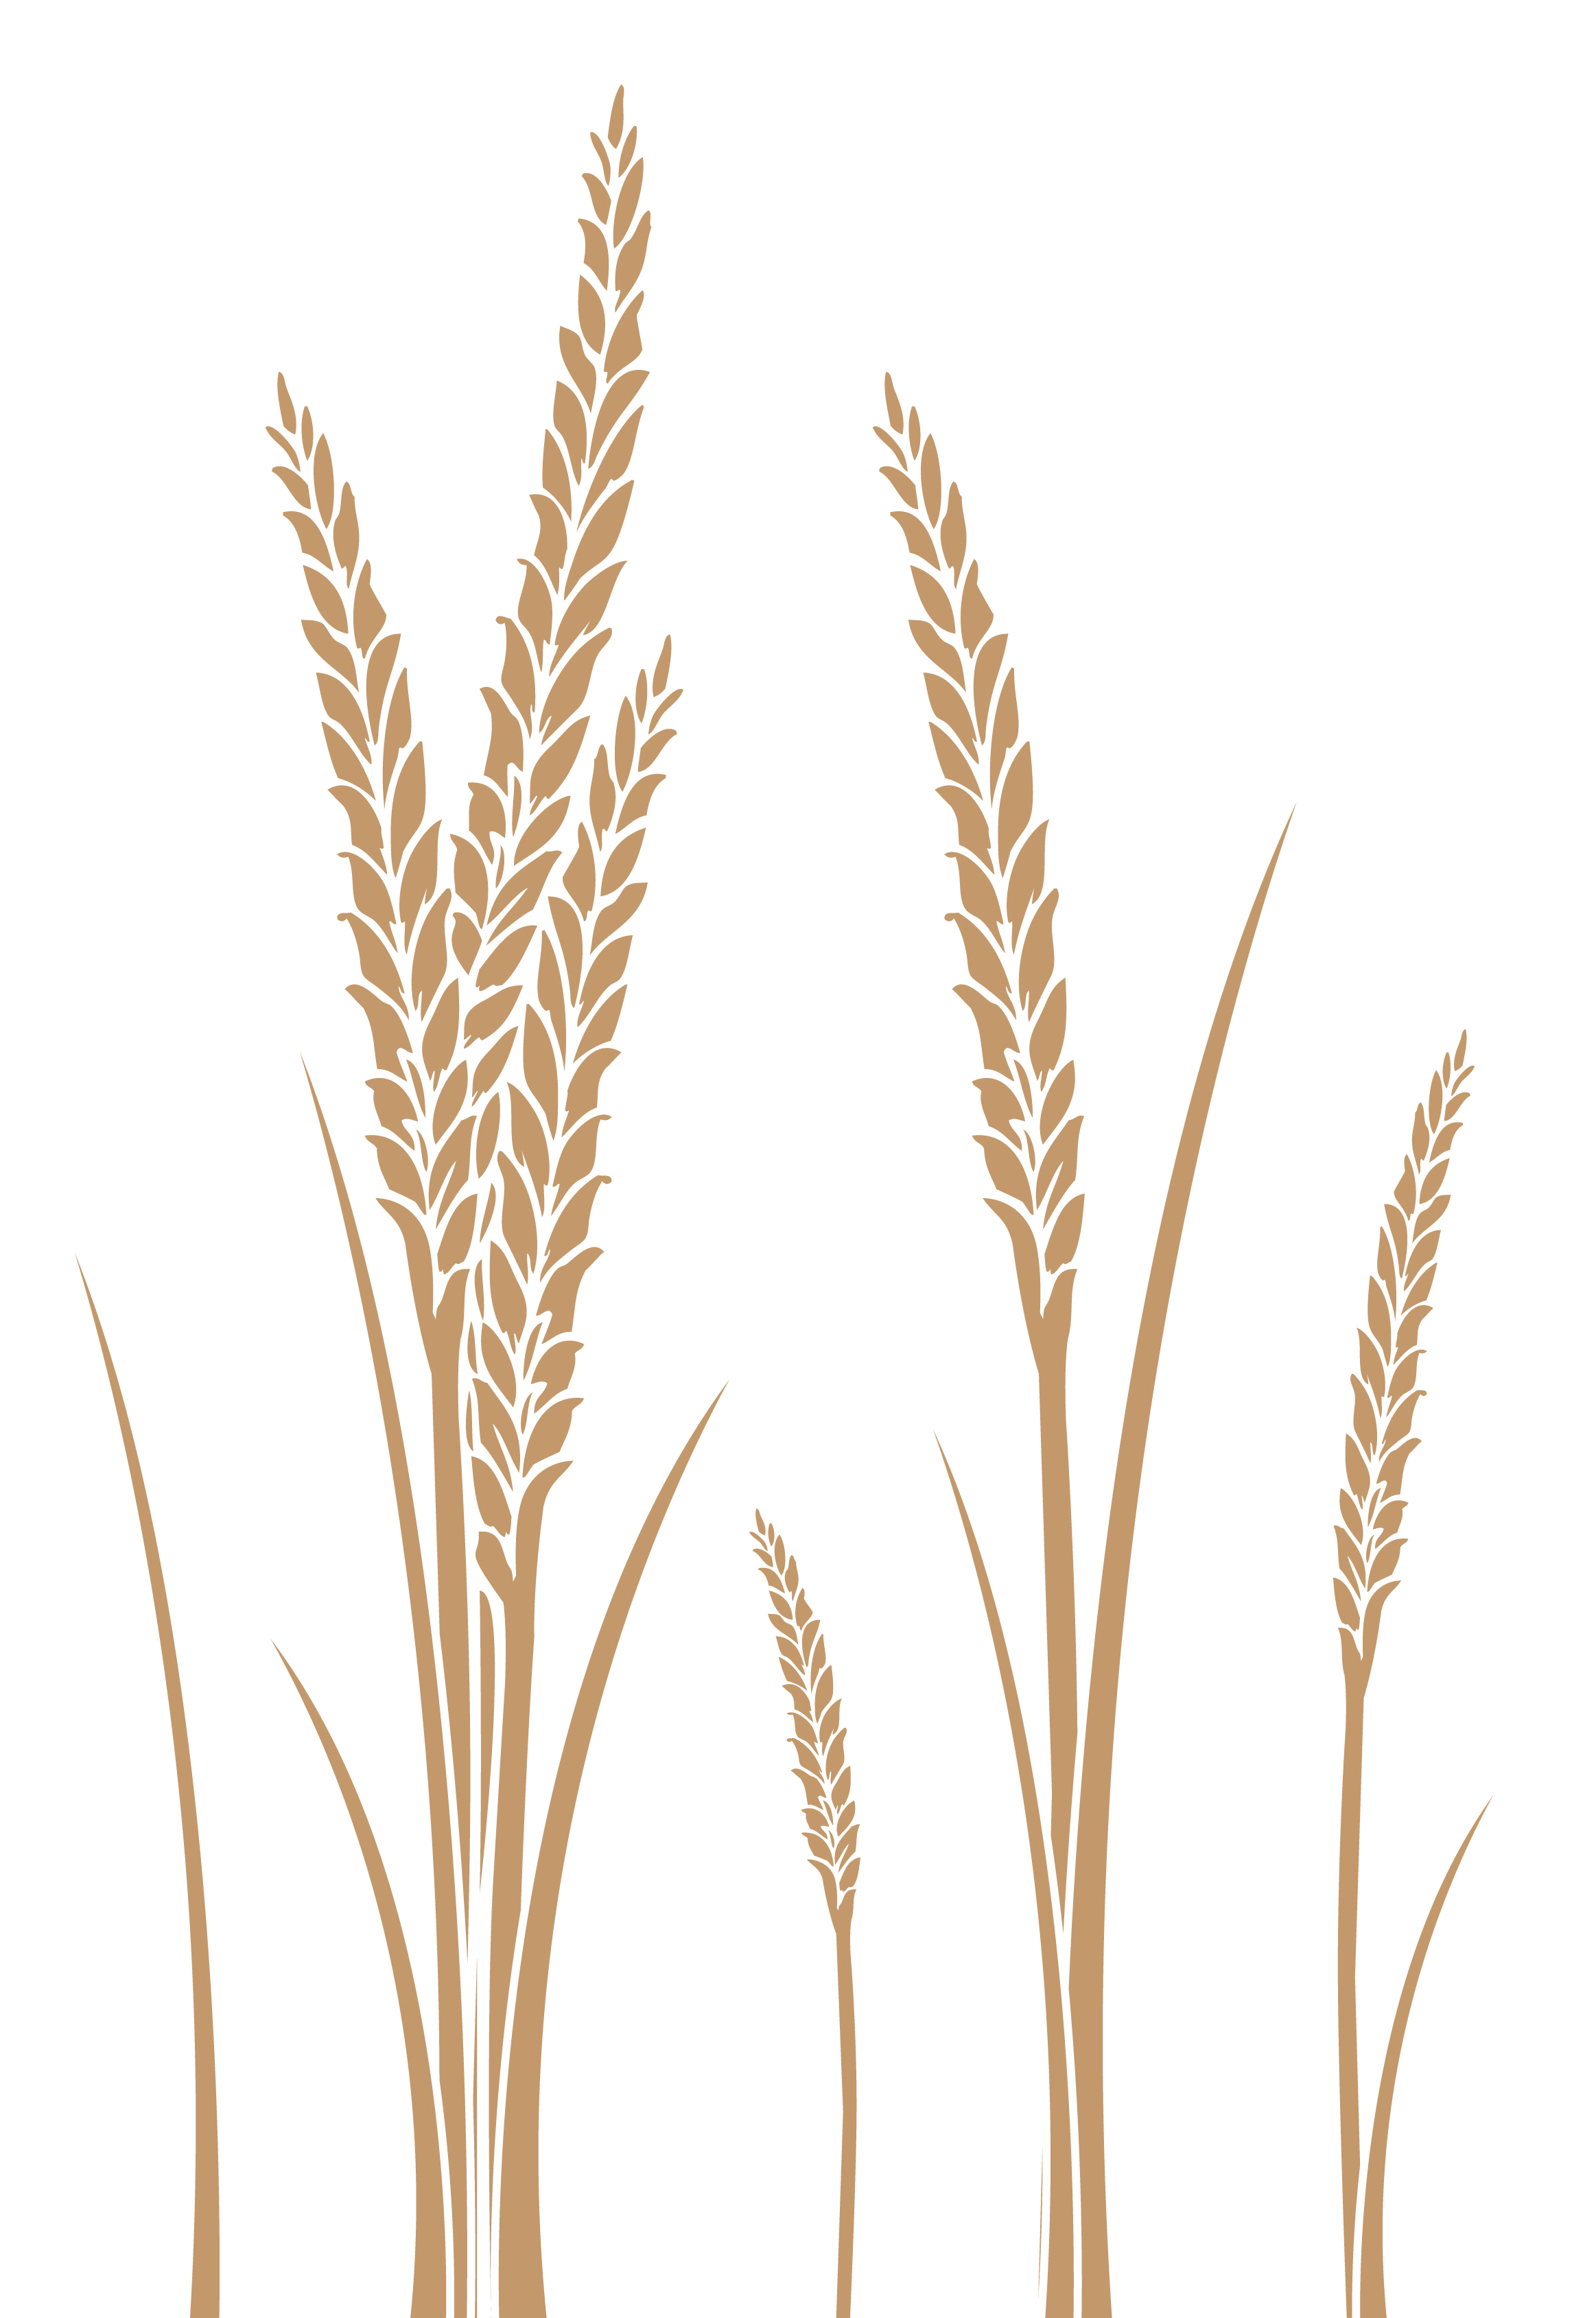 Free Wheat Vector, Download Free Wheat Vector png images, Free ClipArts